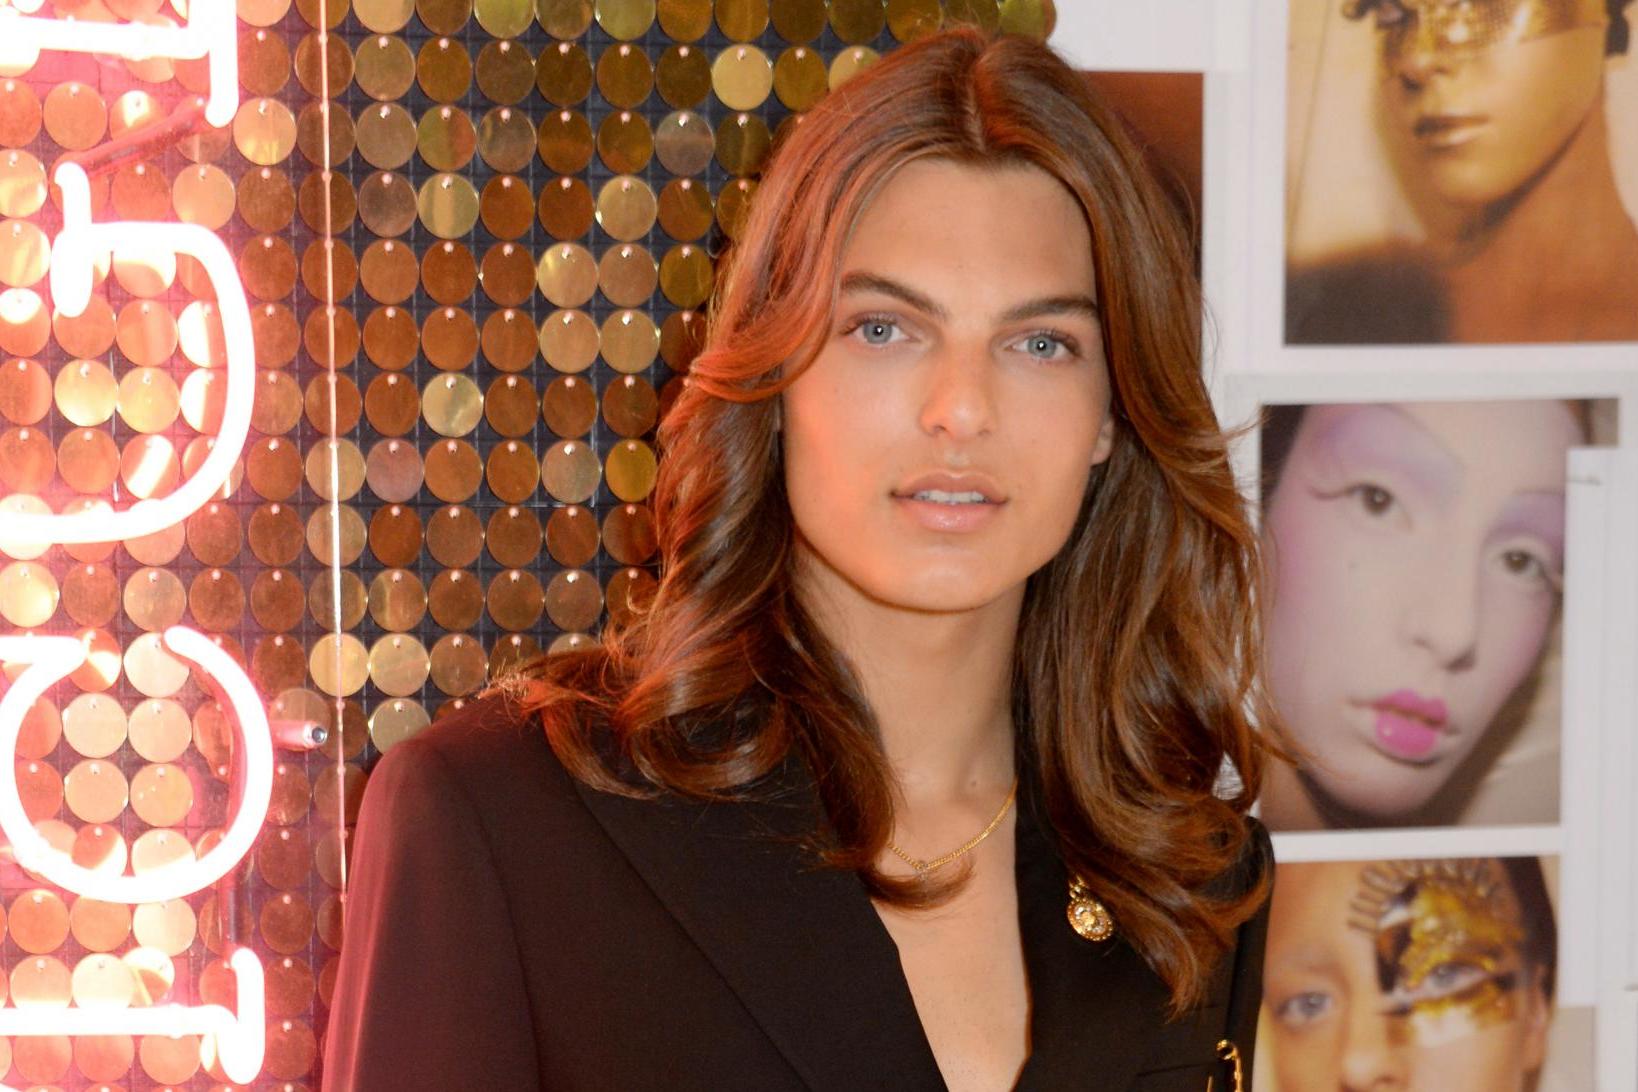 Pat McGrath Muse Damian Hurley launches the Pat McGrath Labs new product range, 'Sublime Perfection: The System' at Selfridges